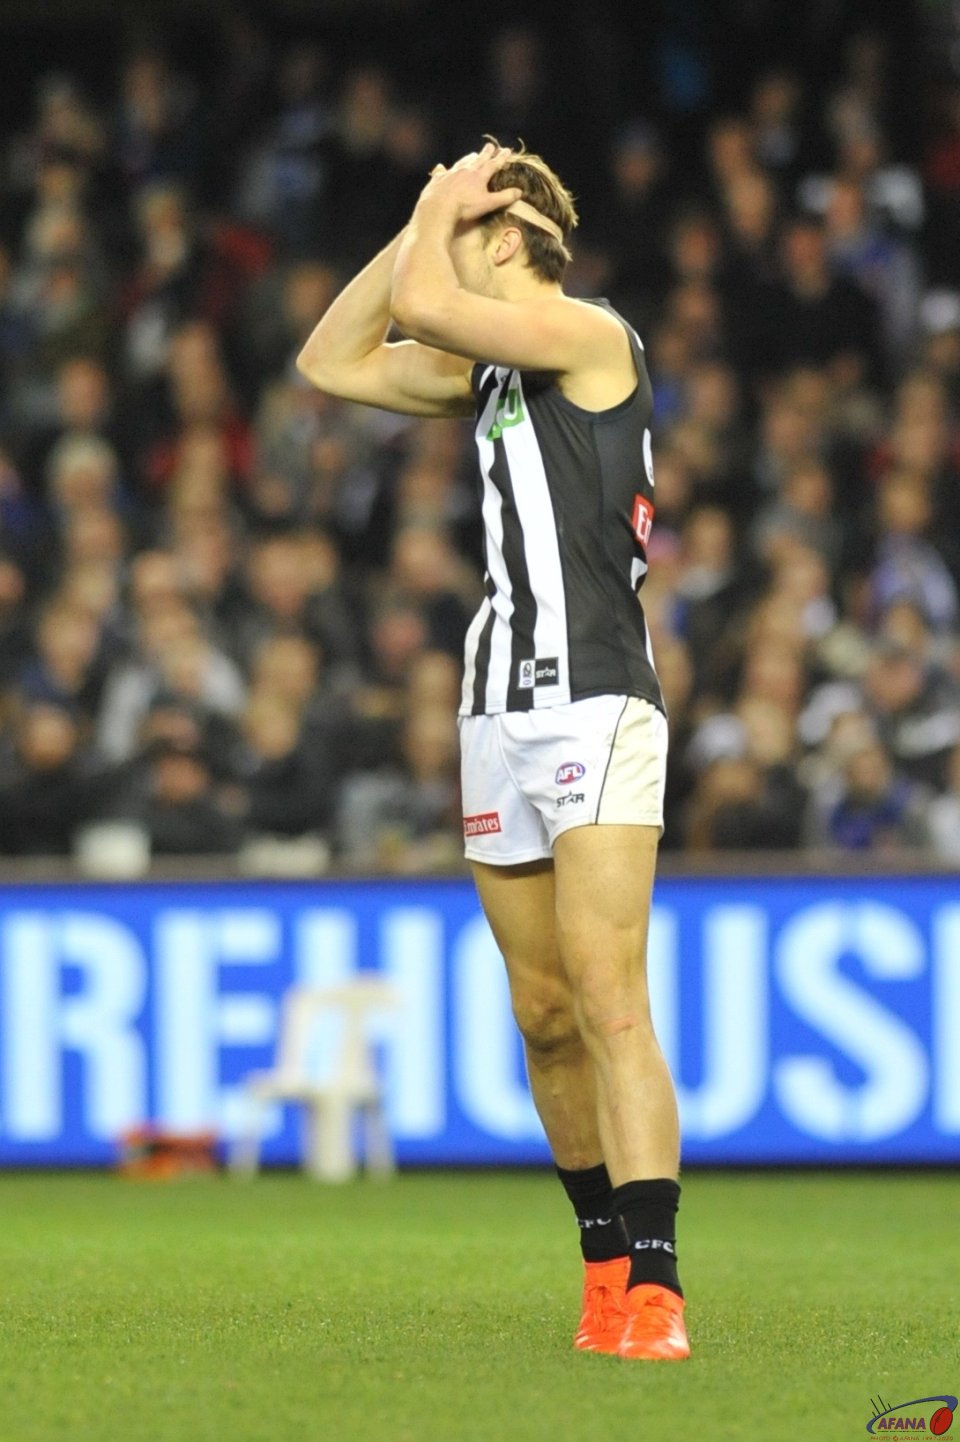 Darcy Moore rues a missed opprtunity